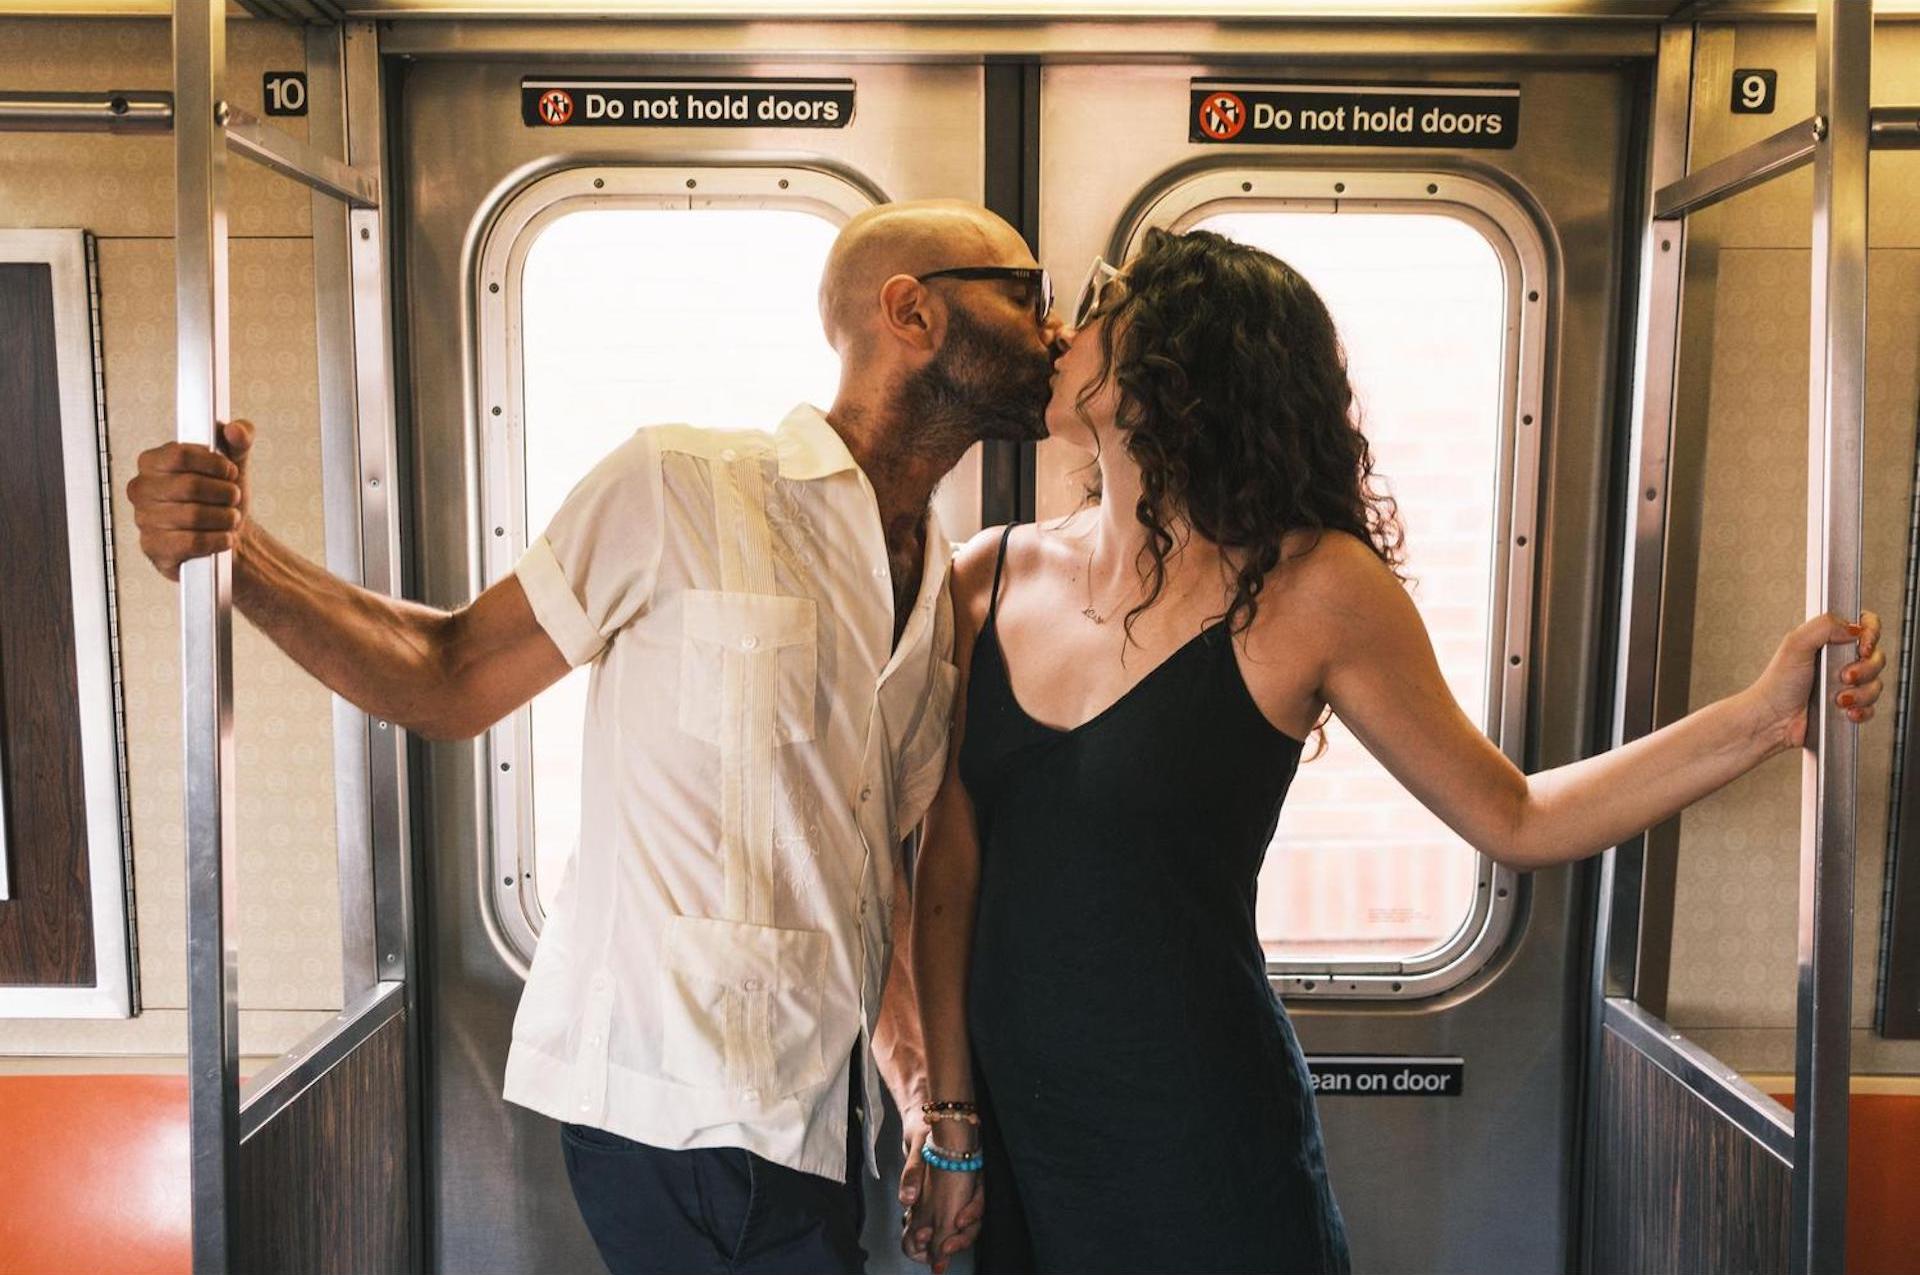 Maria Del Russo and her fiancé on the subway